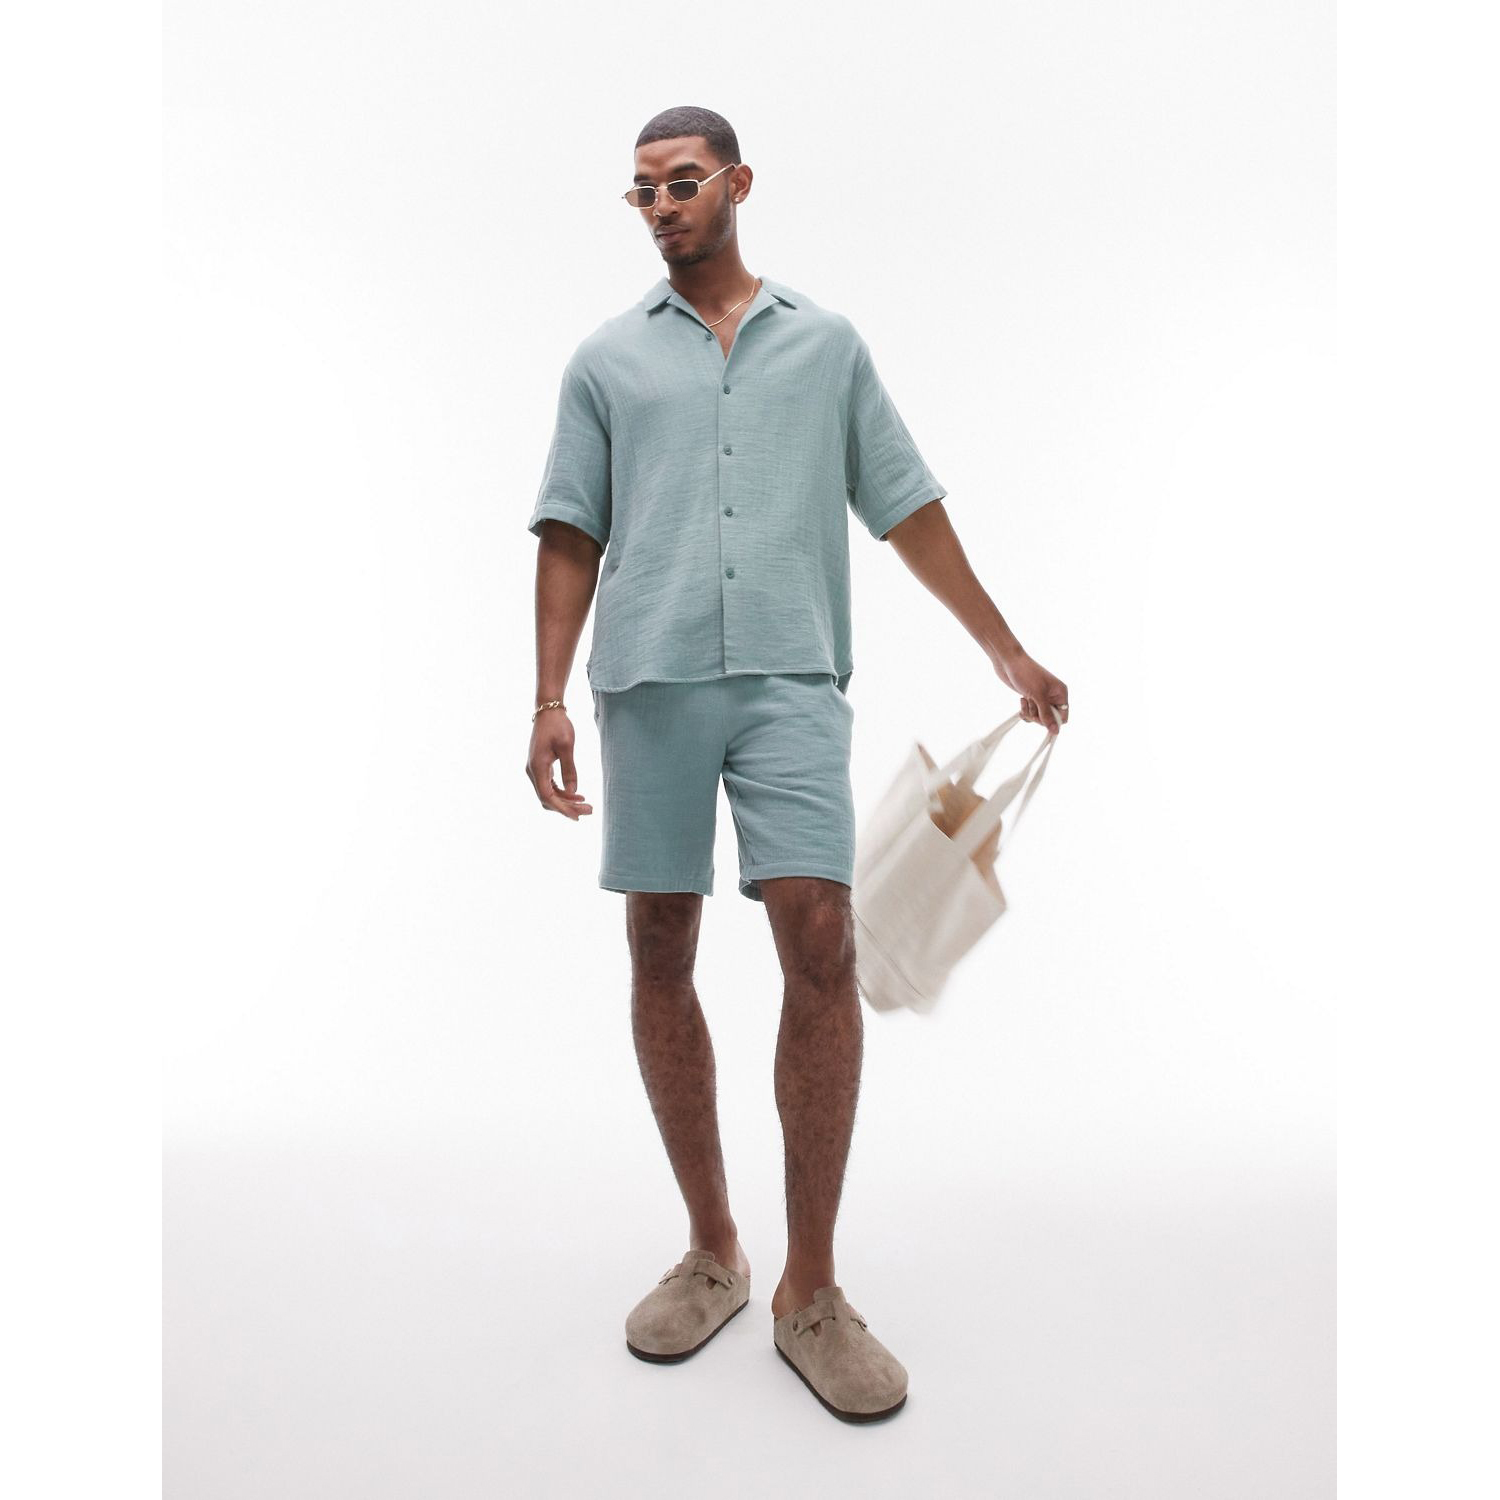 Рубашка Topman Loose With Short Sleeves, серо-зеленый fpace hawaii beach flowers loose shirts with short sleeves couples ins port fengri system with tide restoring ancient ways shirt